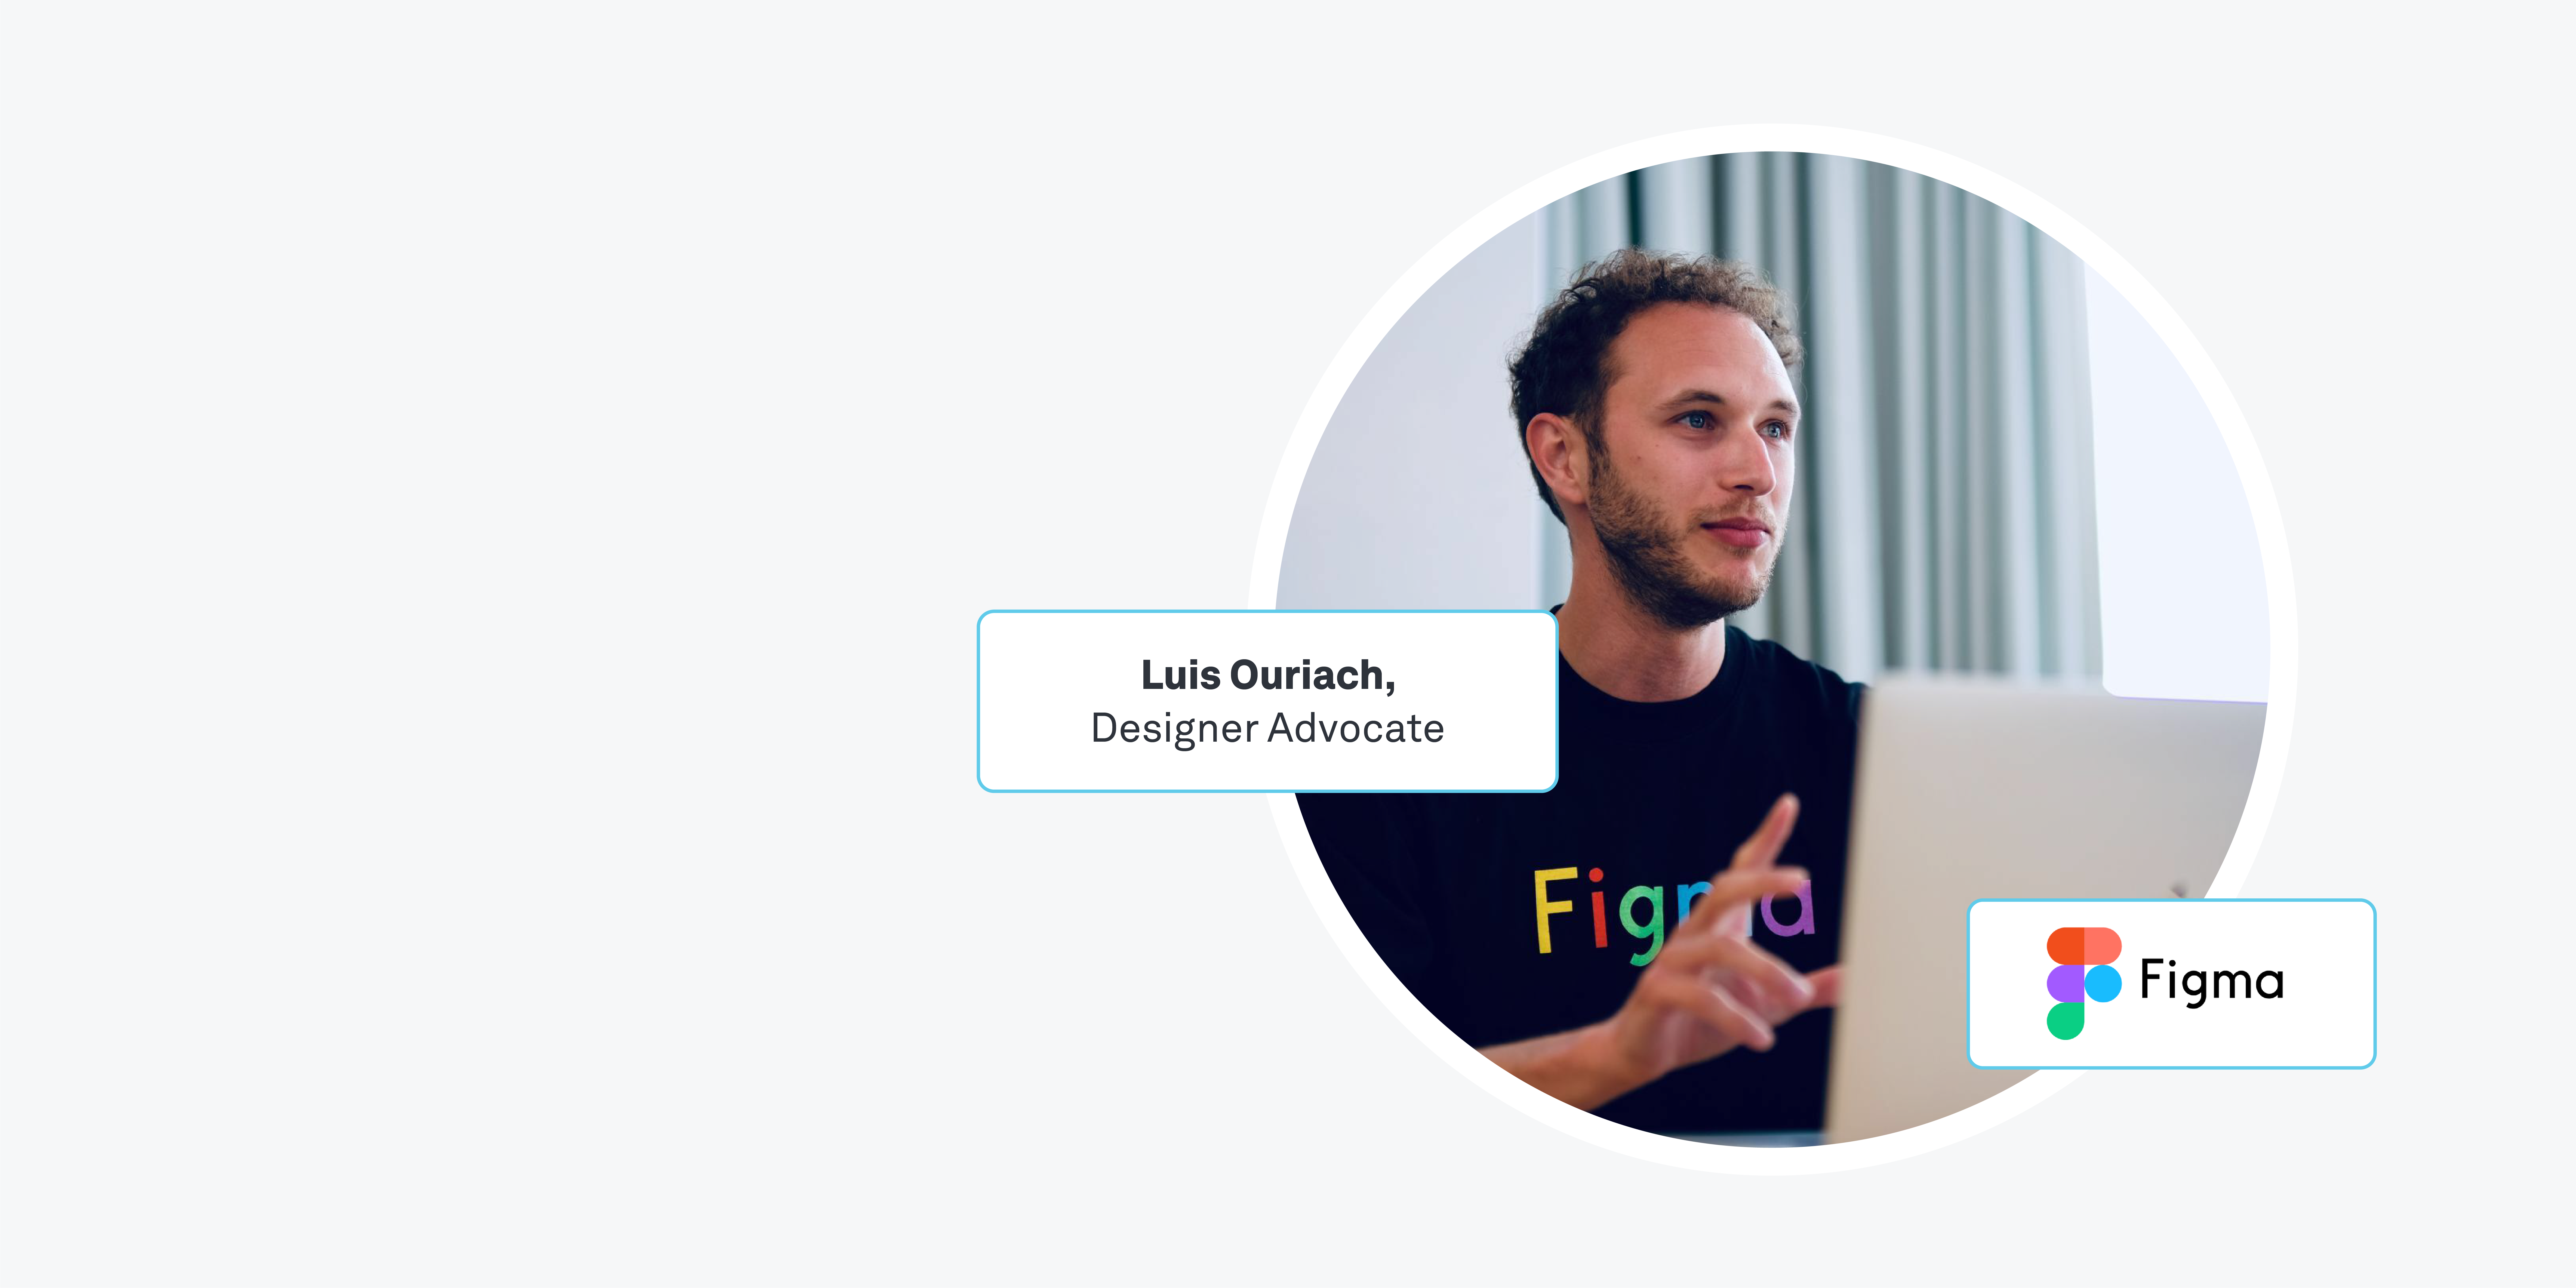 Design advocacy with Figma's Luis Ouriach